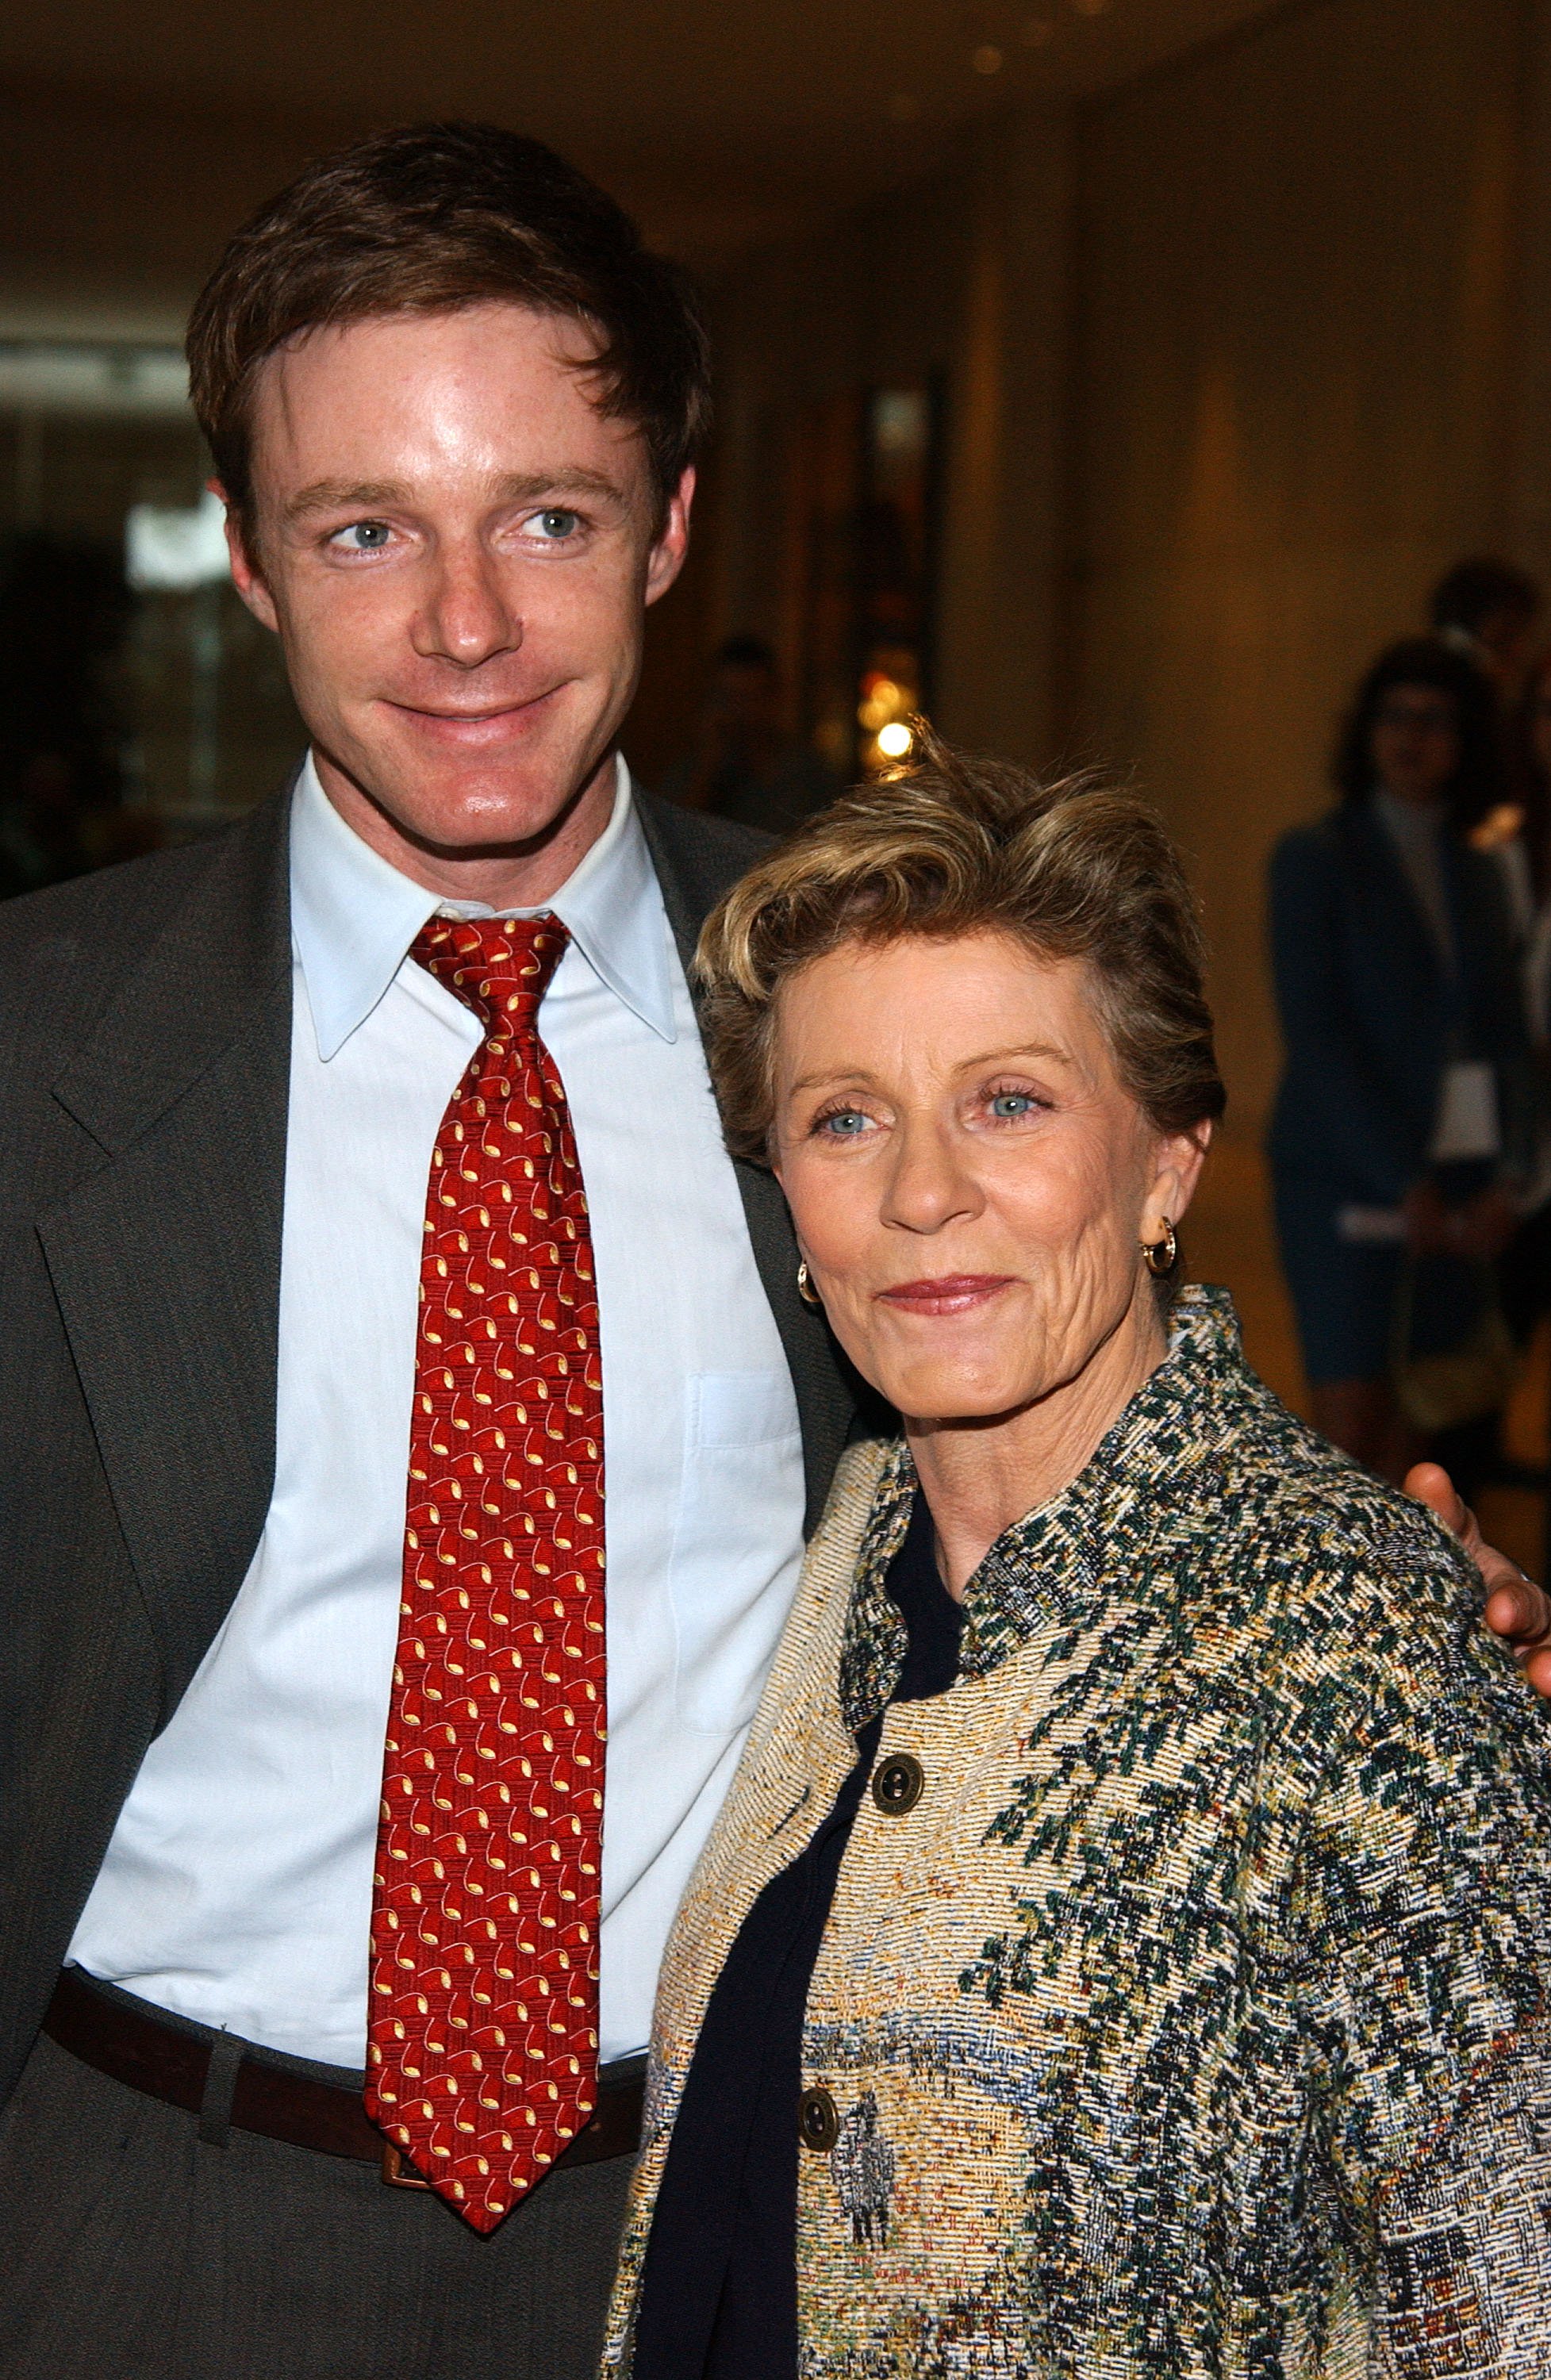 Patty Duke and son Mackenzie Astin attend the 41st Annual ICG Publicists Awards at the Beverly Hilton Hotel on February 27, 2004 in Beverly Hills, California. Photo: Getty Images